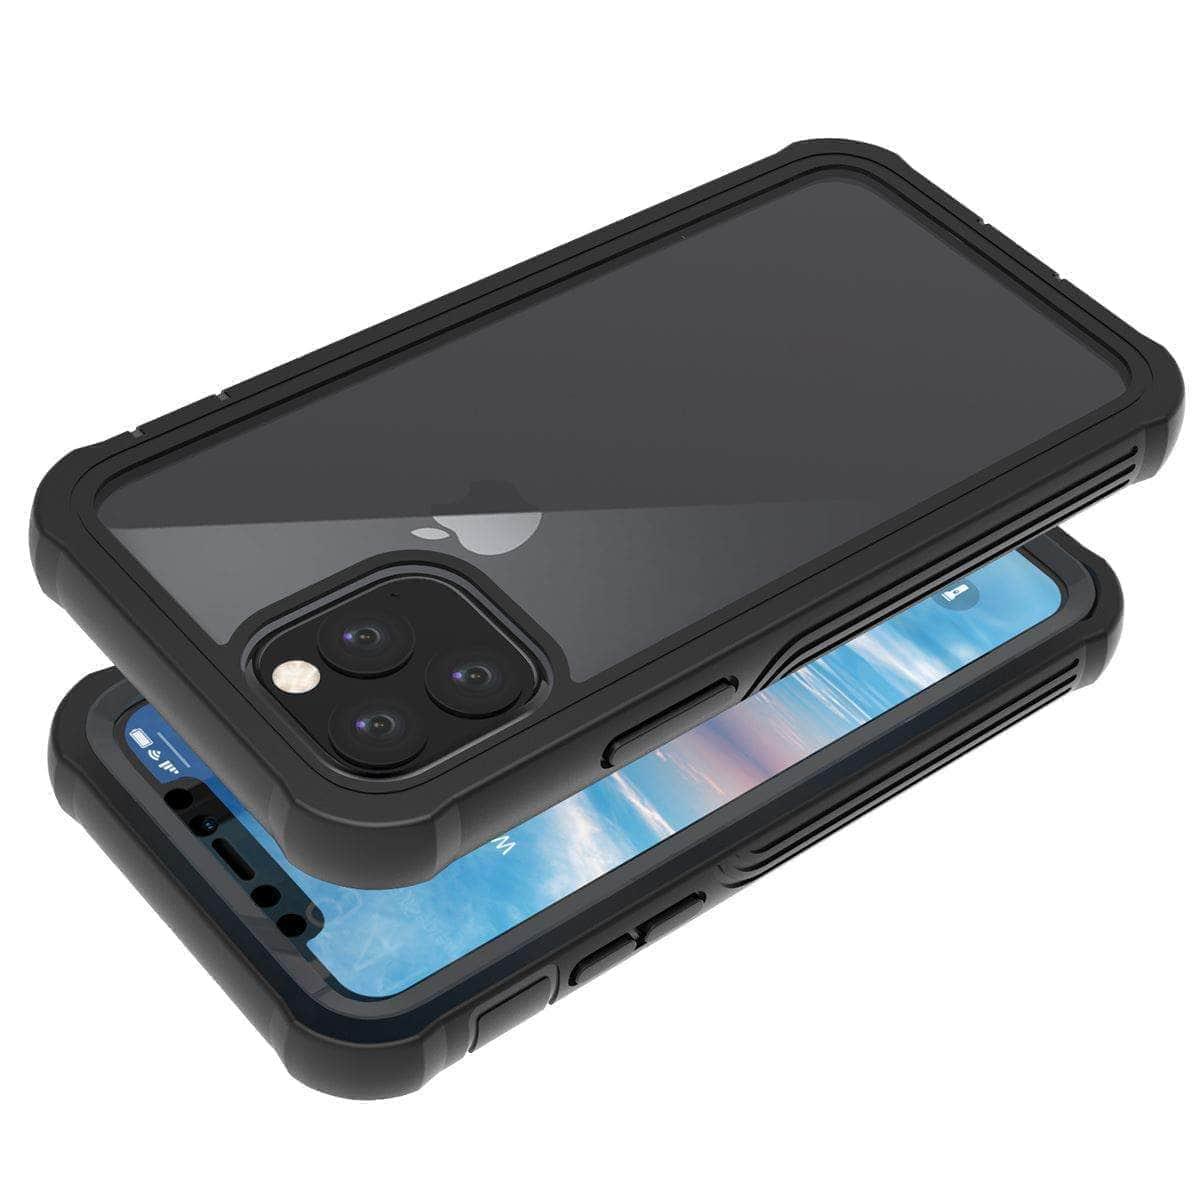 CaseBuddy Casebuddy iPhone 11 Pro Max 360 Degree Protection Sport Shockproof Case